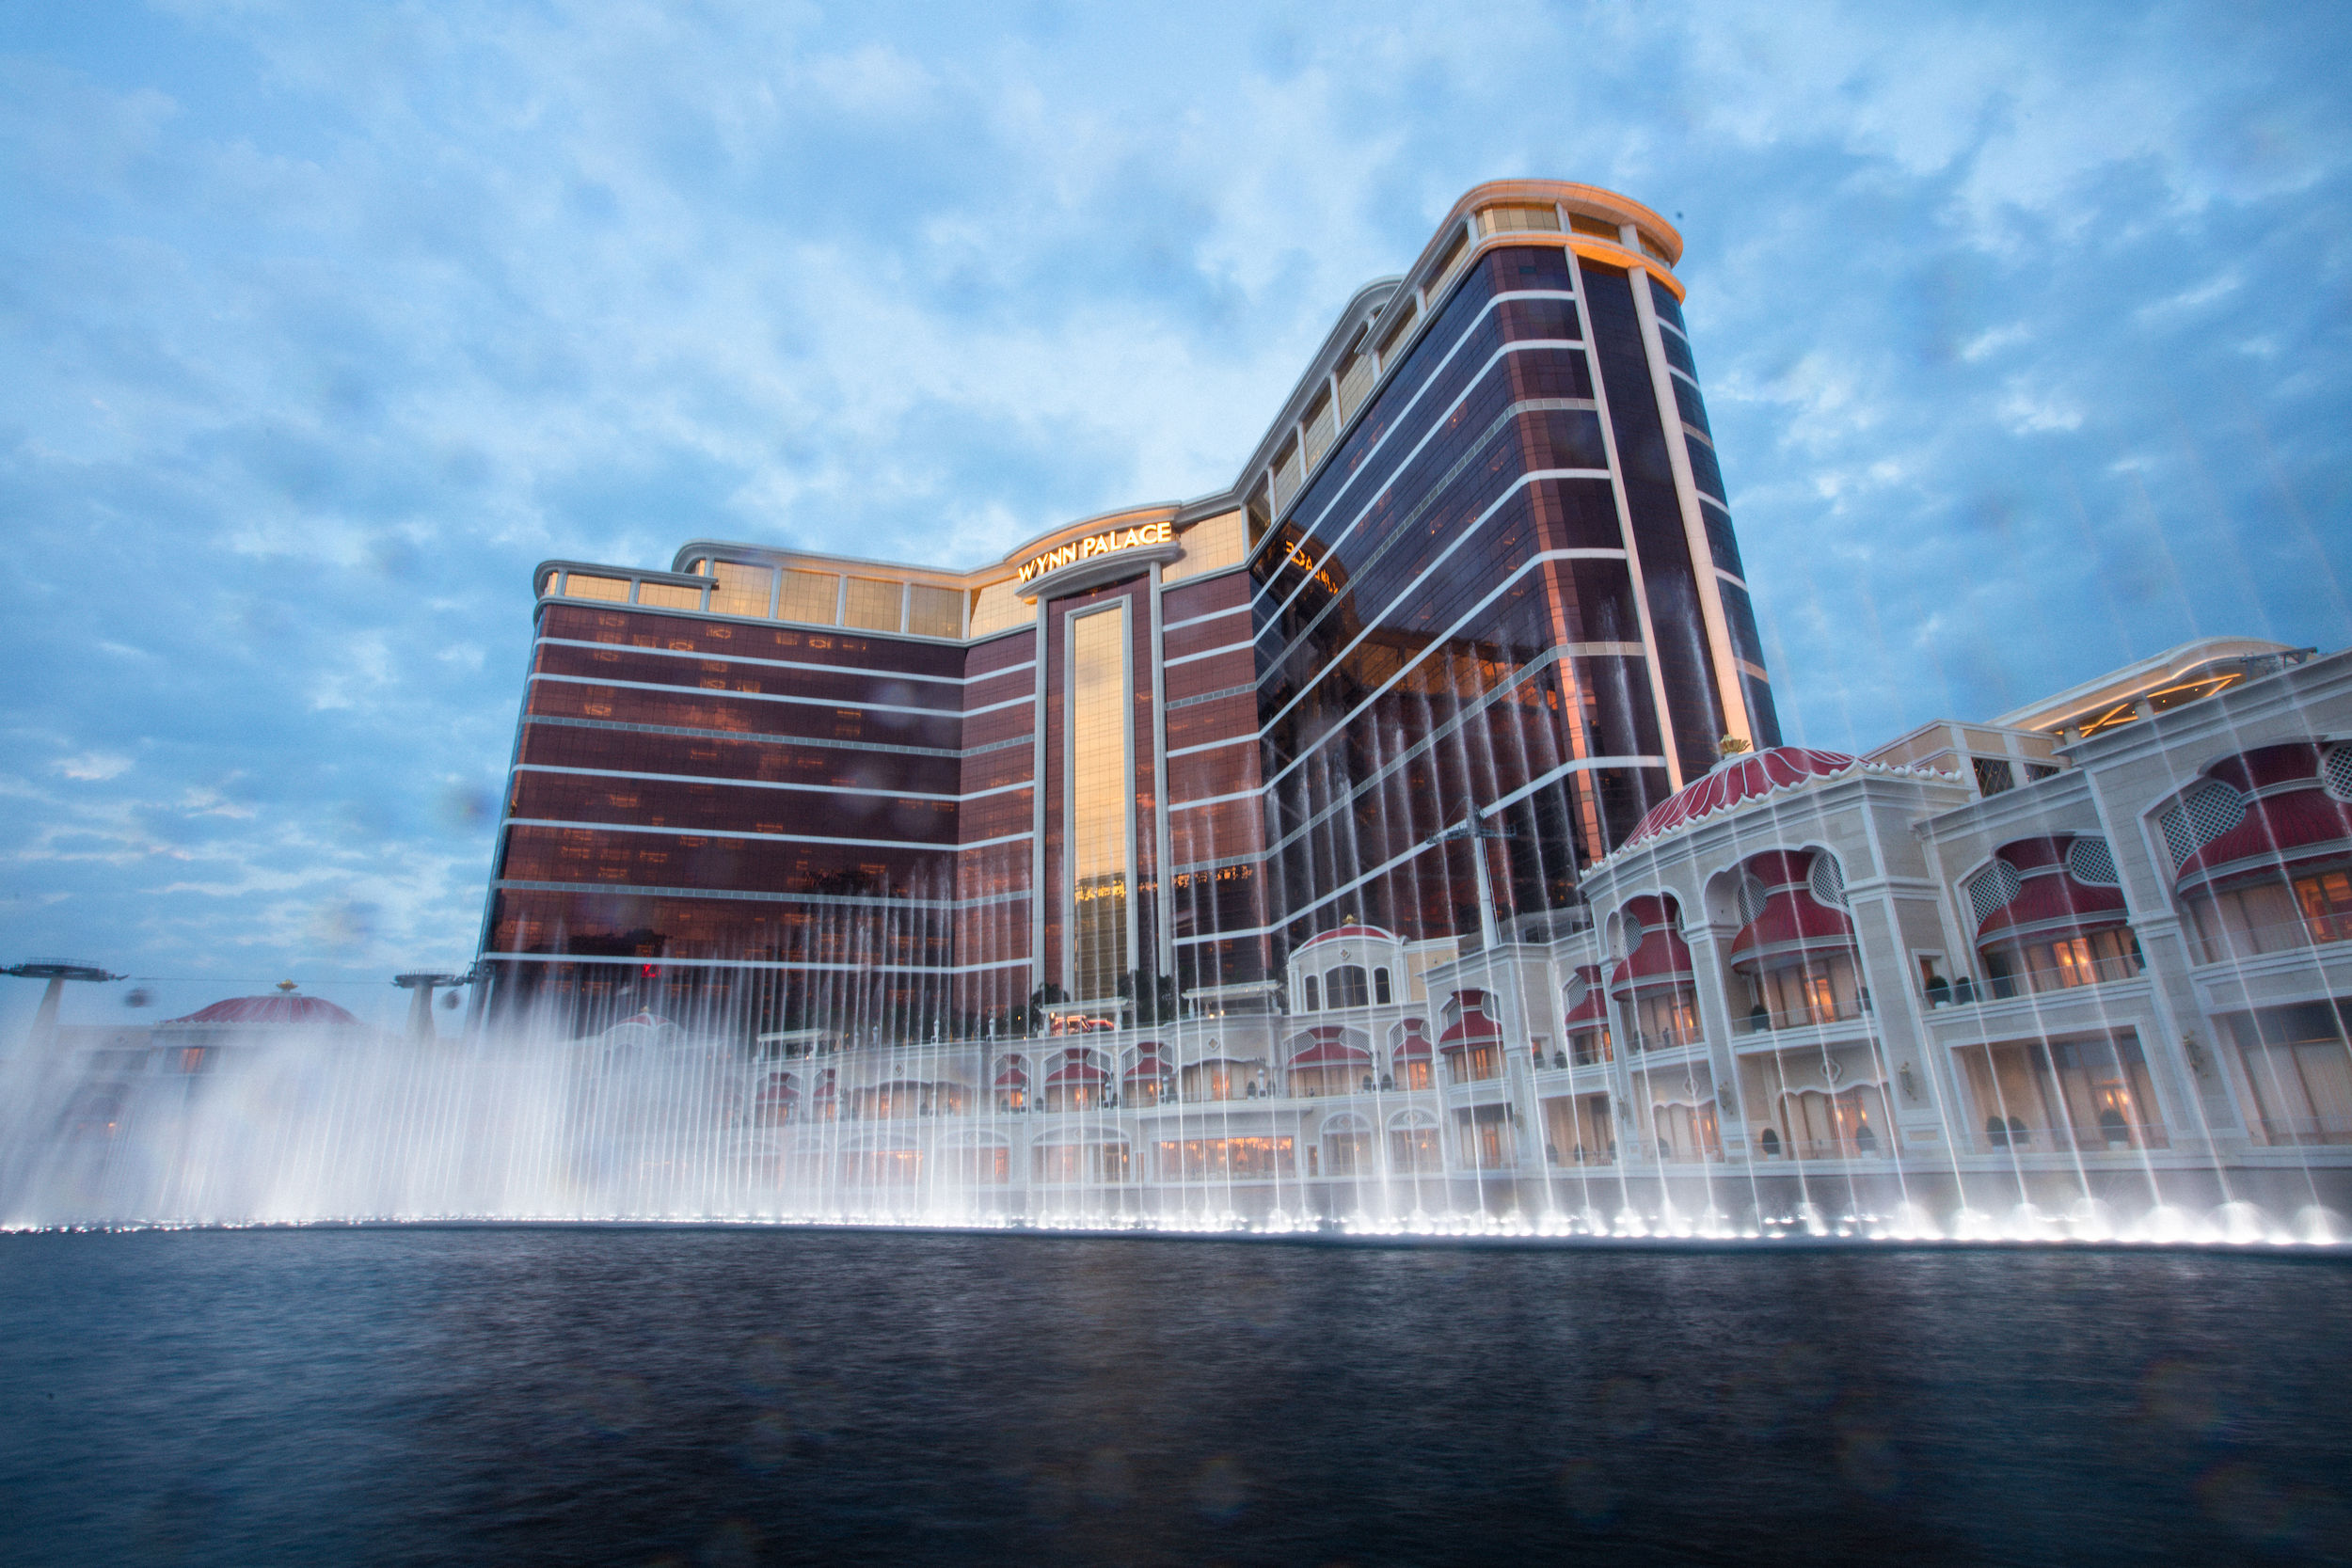 Suite escape: Wynn Palace offers the ultimate getaway